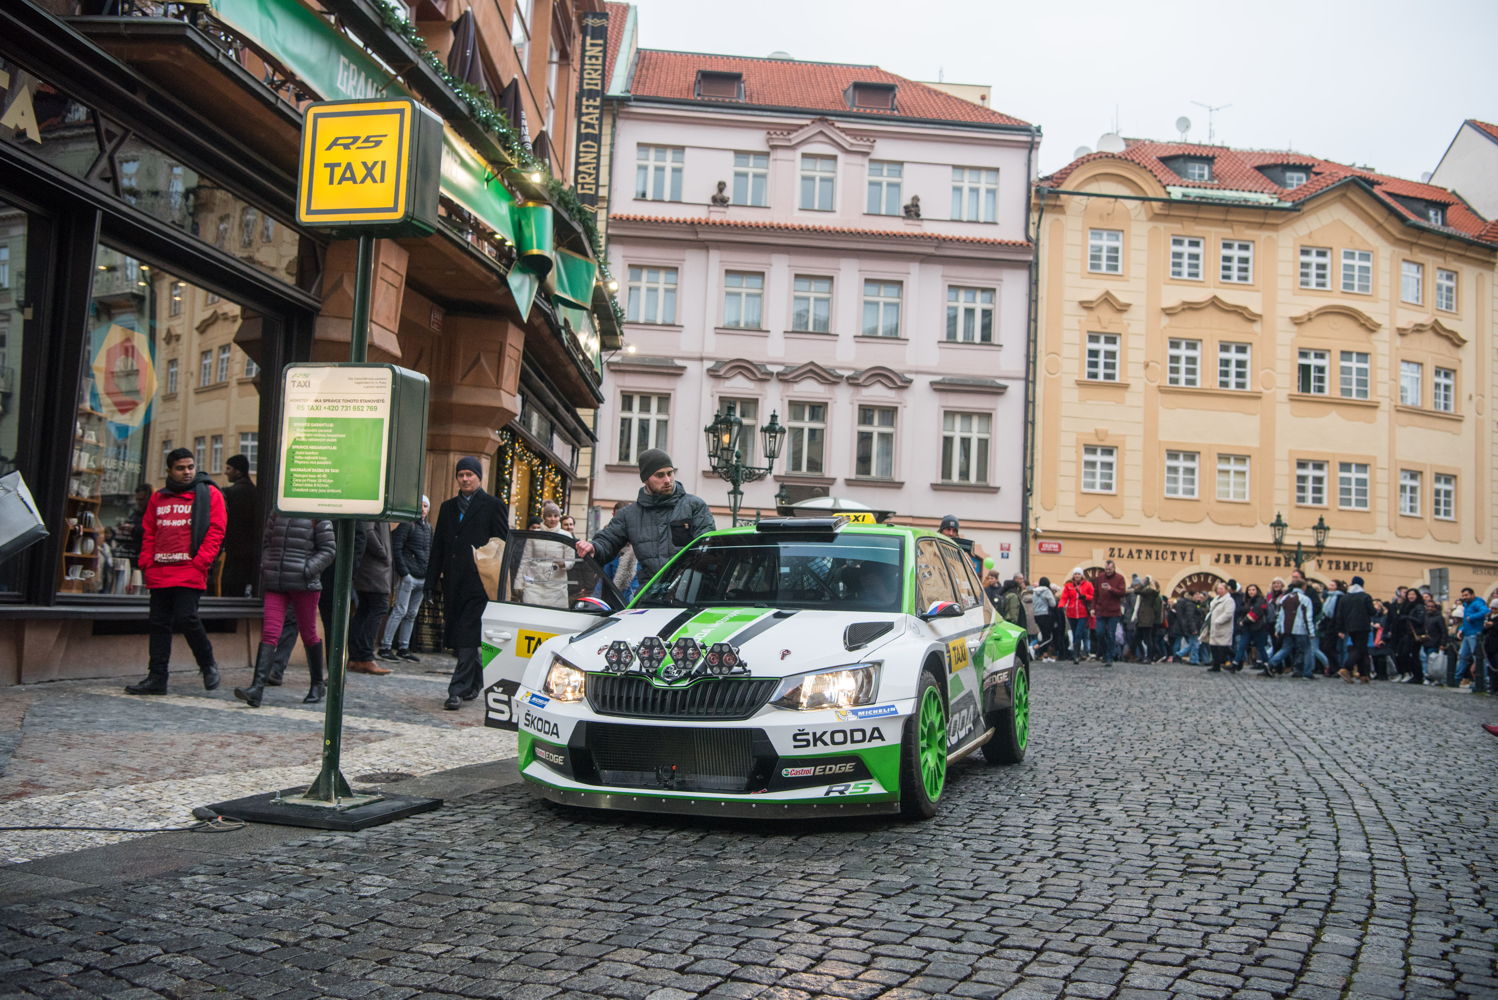 Czech Rally Champion Jan Kopecký answered to calls for a taxi, showing up in a 290 bhp ŠKODA FABIA R5 rally car.